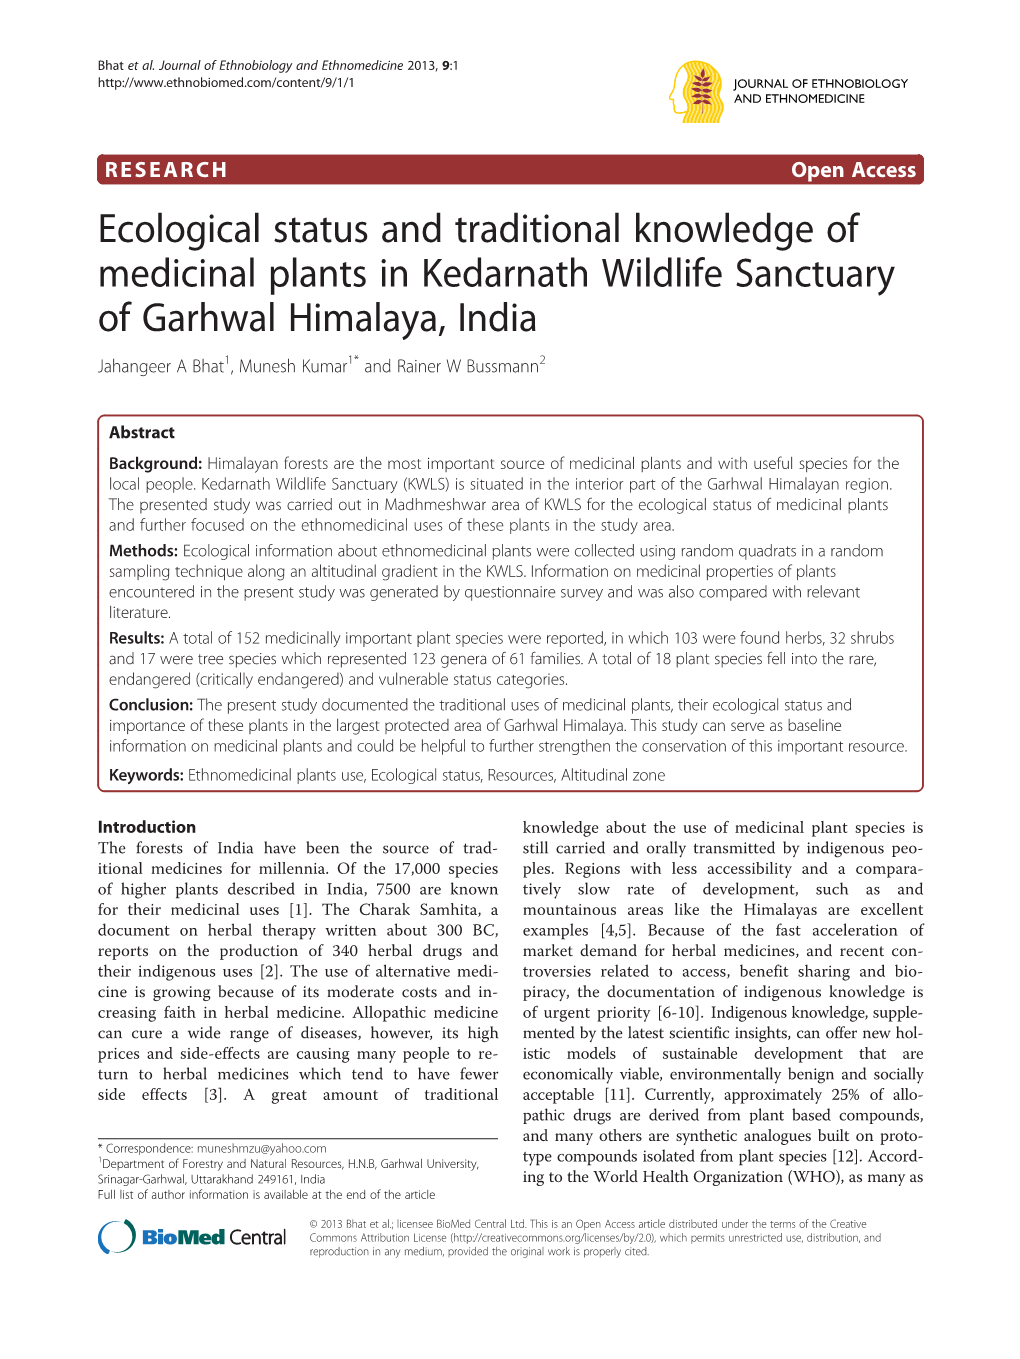 Ecological Status and Traditional Knowledge of Medicinal Plants In